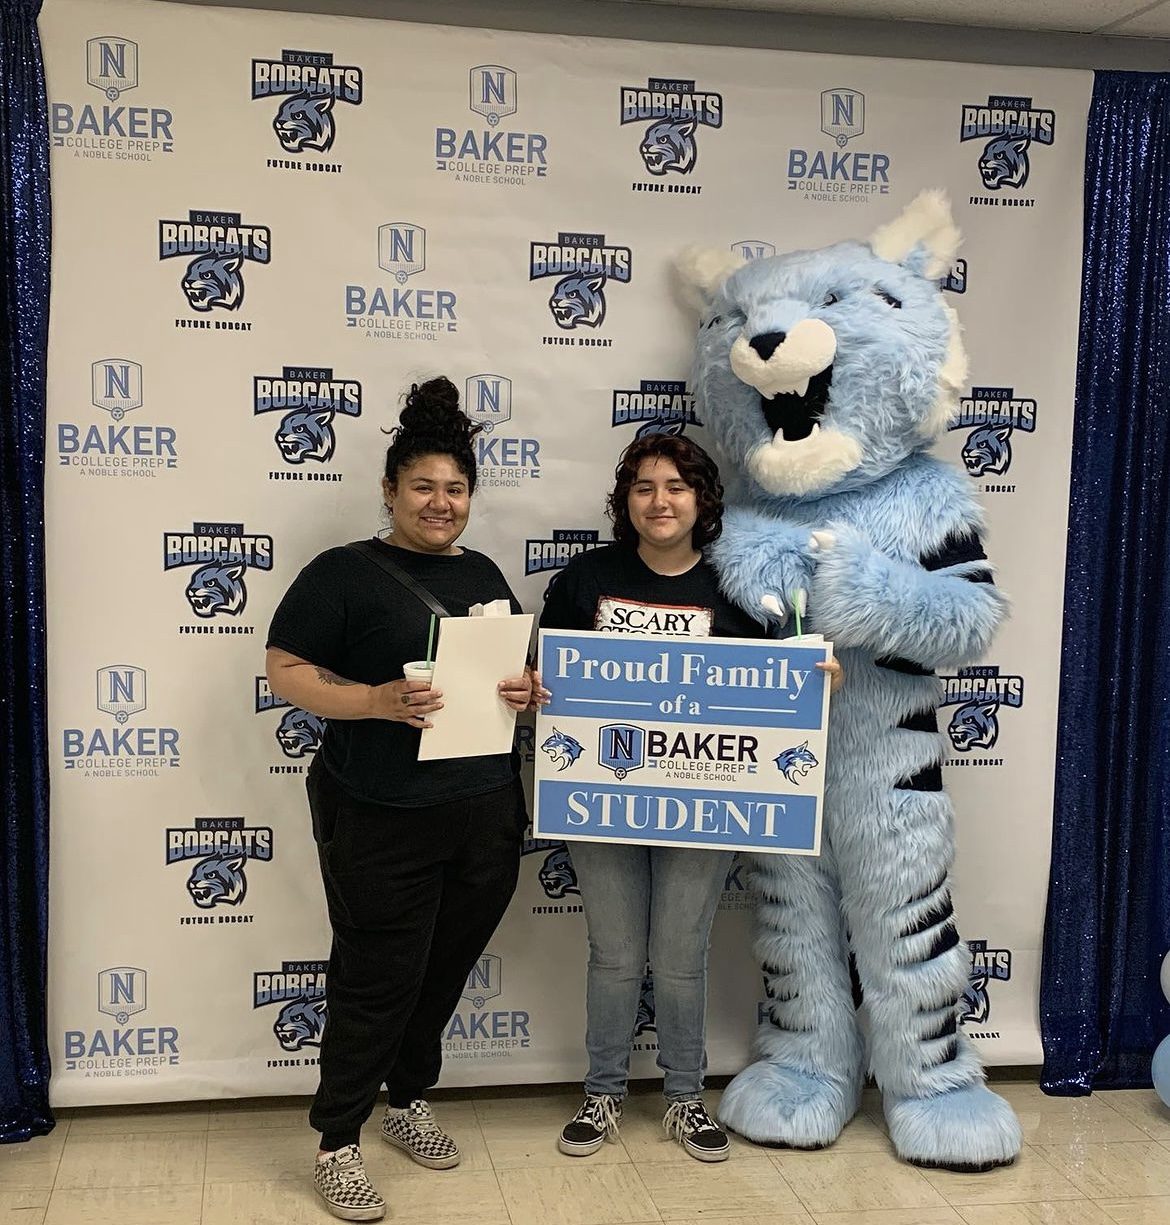 Photo shows a new Baker College Prep student and one of their family members posing with the Baker Bobcat mascot in front of a backdrop with the Baker logo. The student holds a light blue and white sign that has the Baker logo on it and says "Proud Family of a Baker College Prep Student"